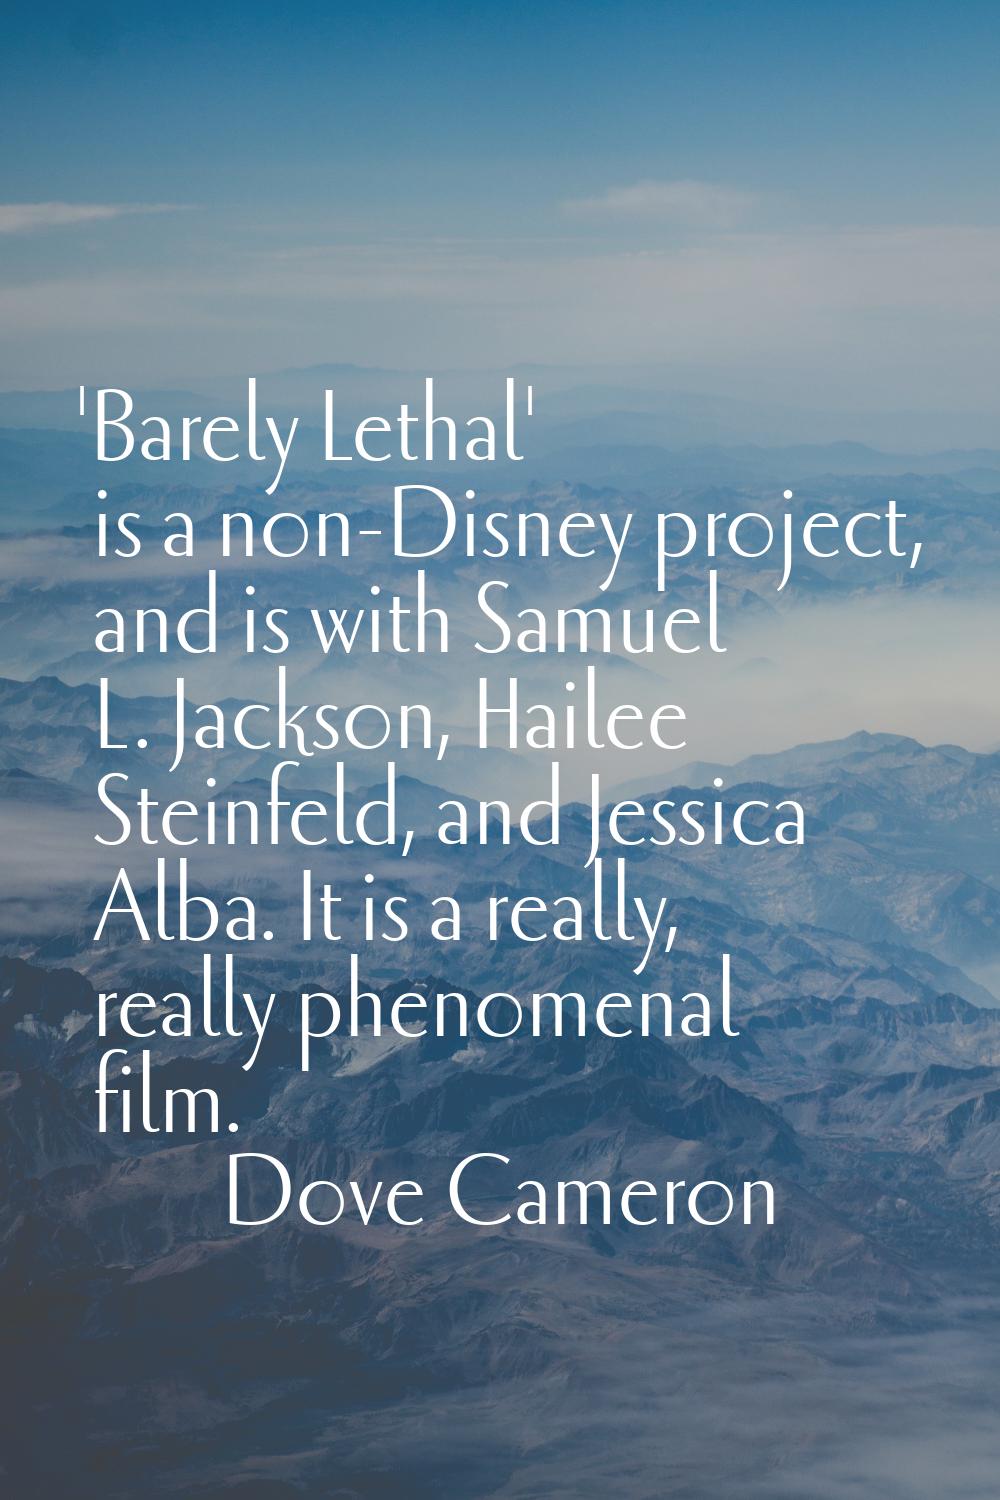 'Barely Lethal' is a non-Disney project, and is with Samuel L. Jackson, Hailee Steinfeld, and Jessi